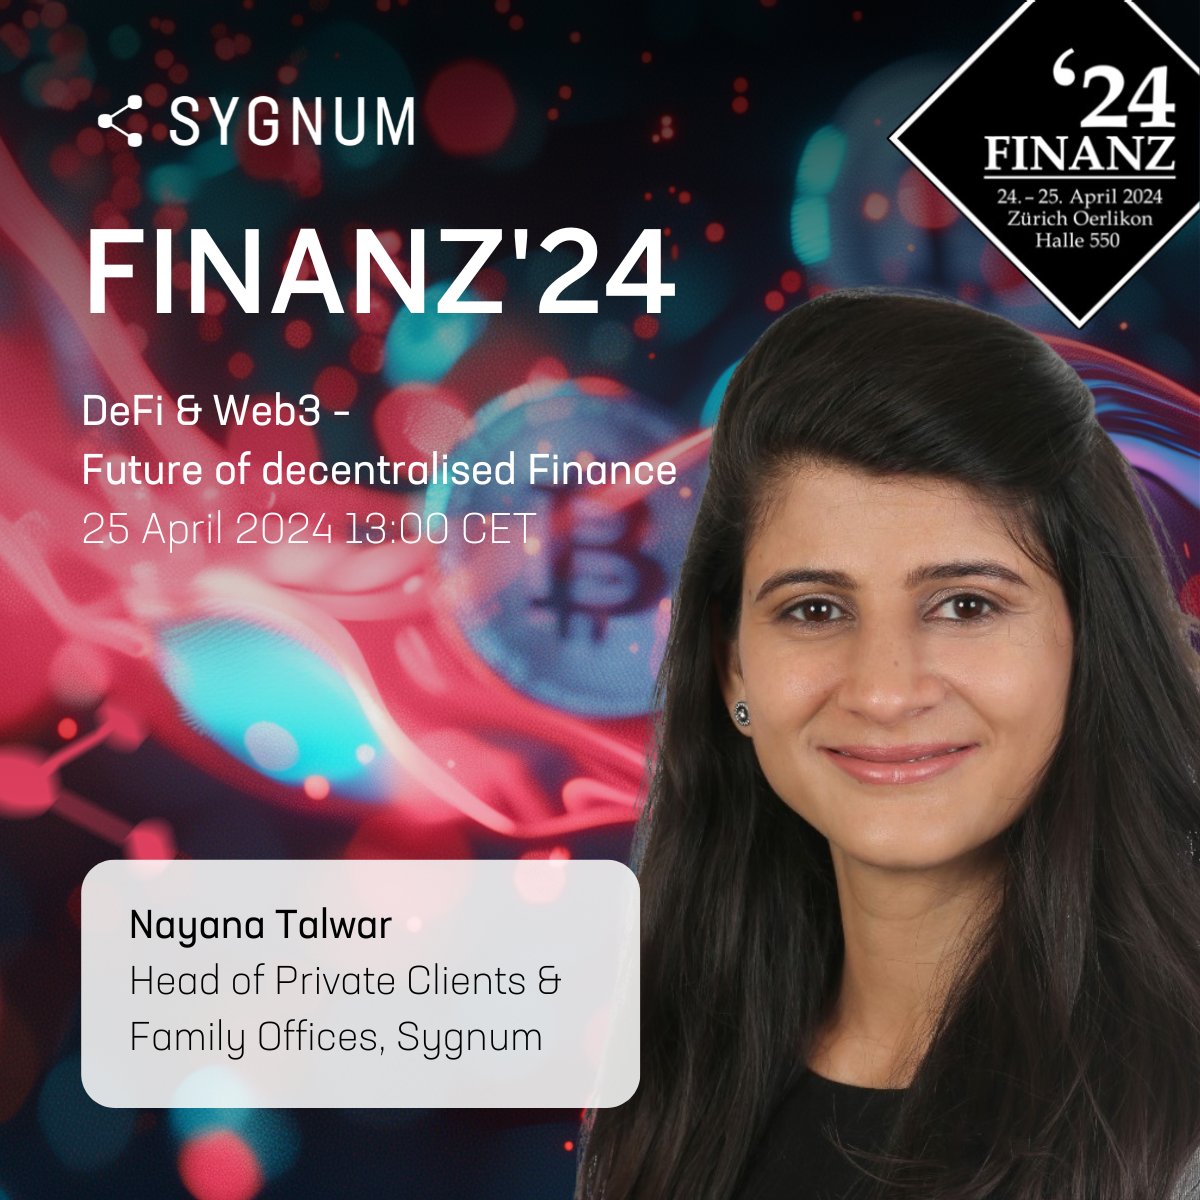 📍 Catch Sygnum’s Head of Private Clients and Family Offices, @nayanatalwar, at the @finanzmesse in Zurich this week. On 25 April at 13:00 CET, Nayana will participate in the “#DeFi & #Web3 - Future of decentralised Finance” panel discussion. Nayana will be joined by Paolo…